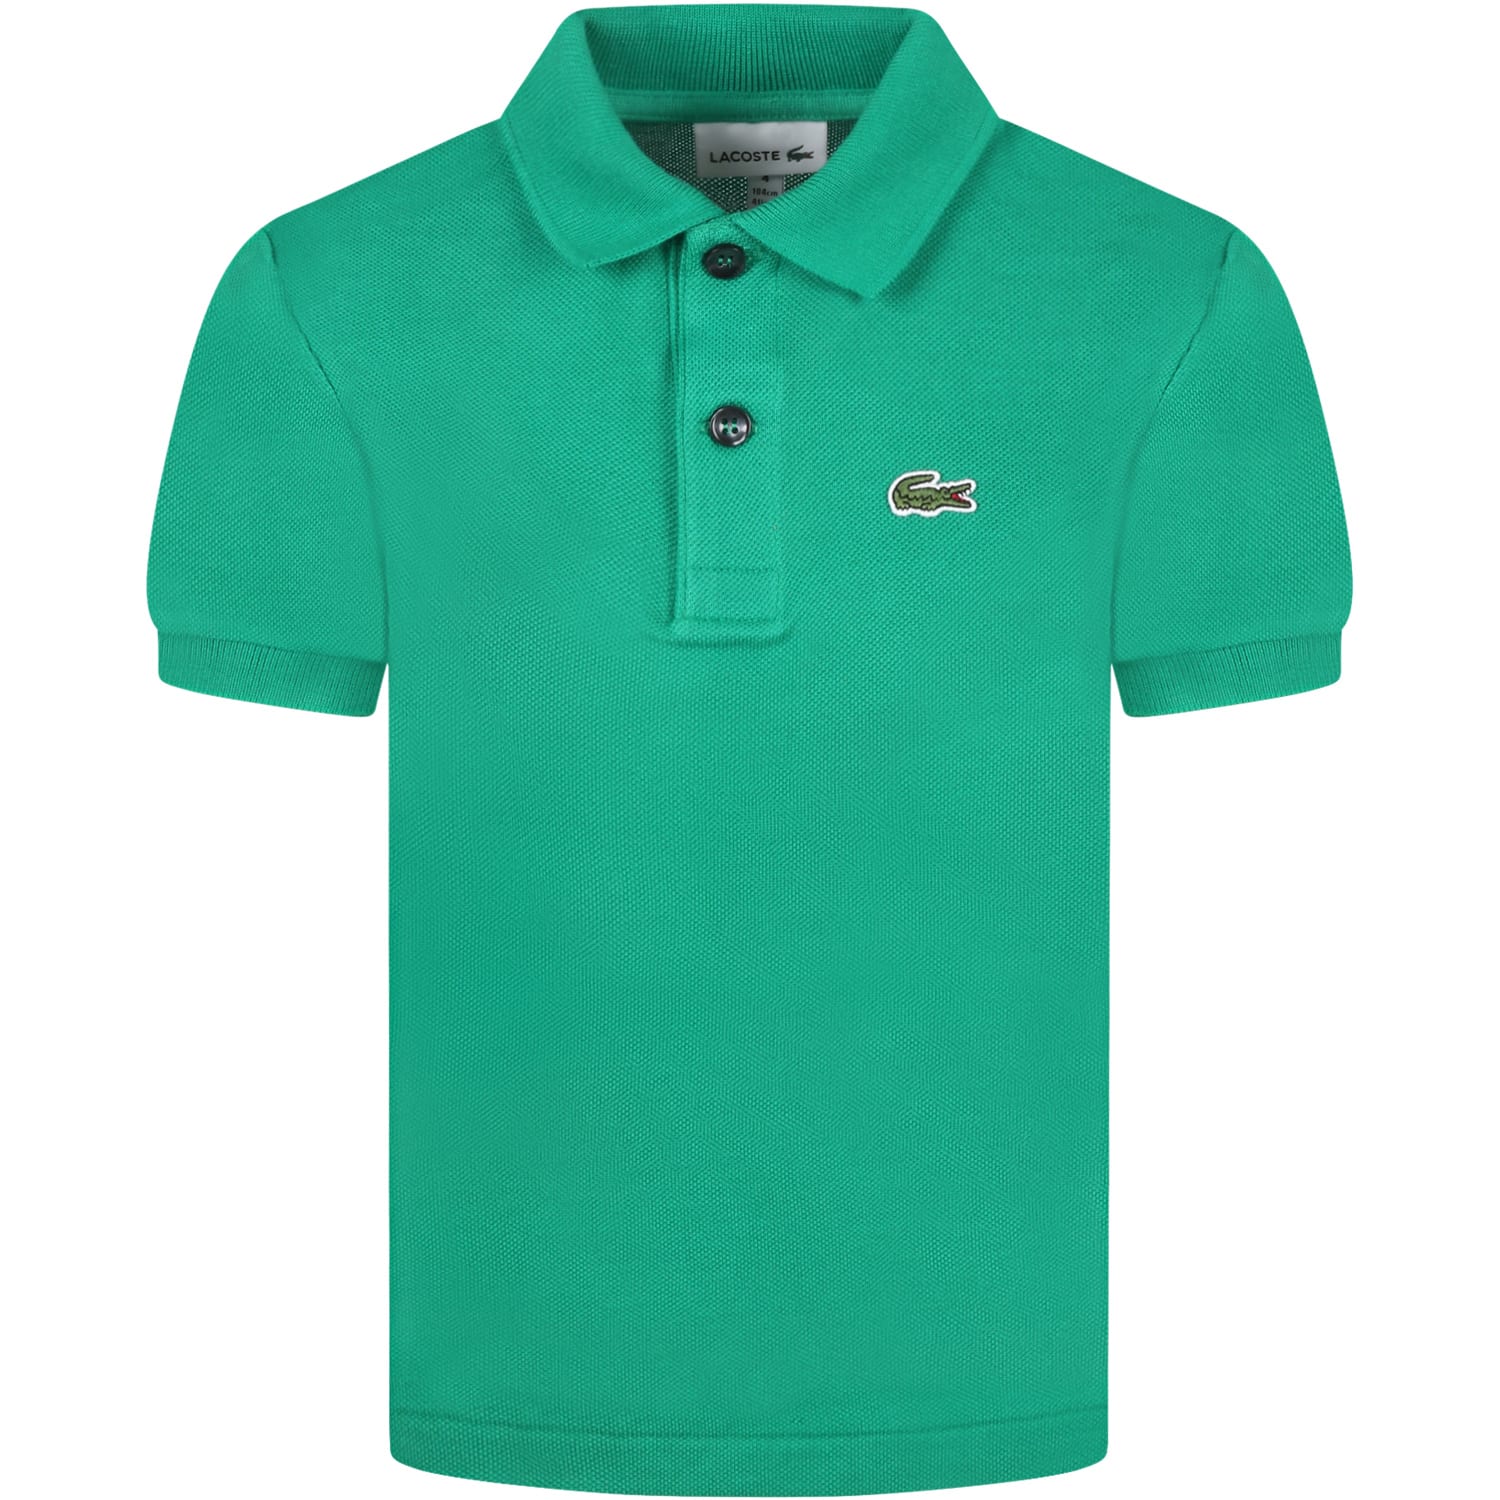 Lacoste Green Polo For Boy With Iconic Crocodile